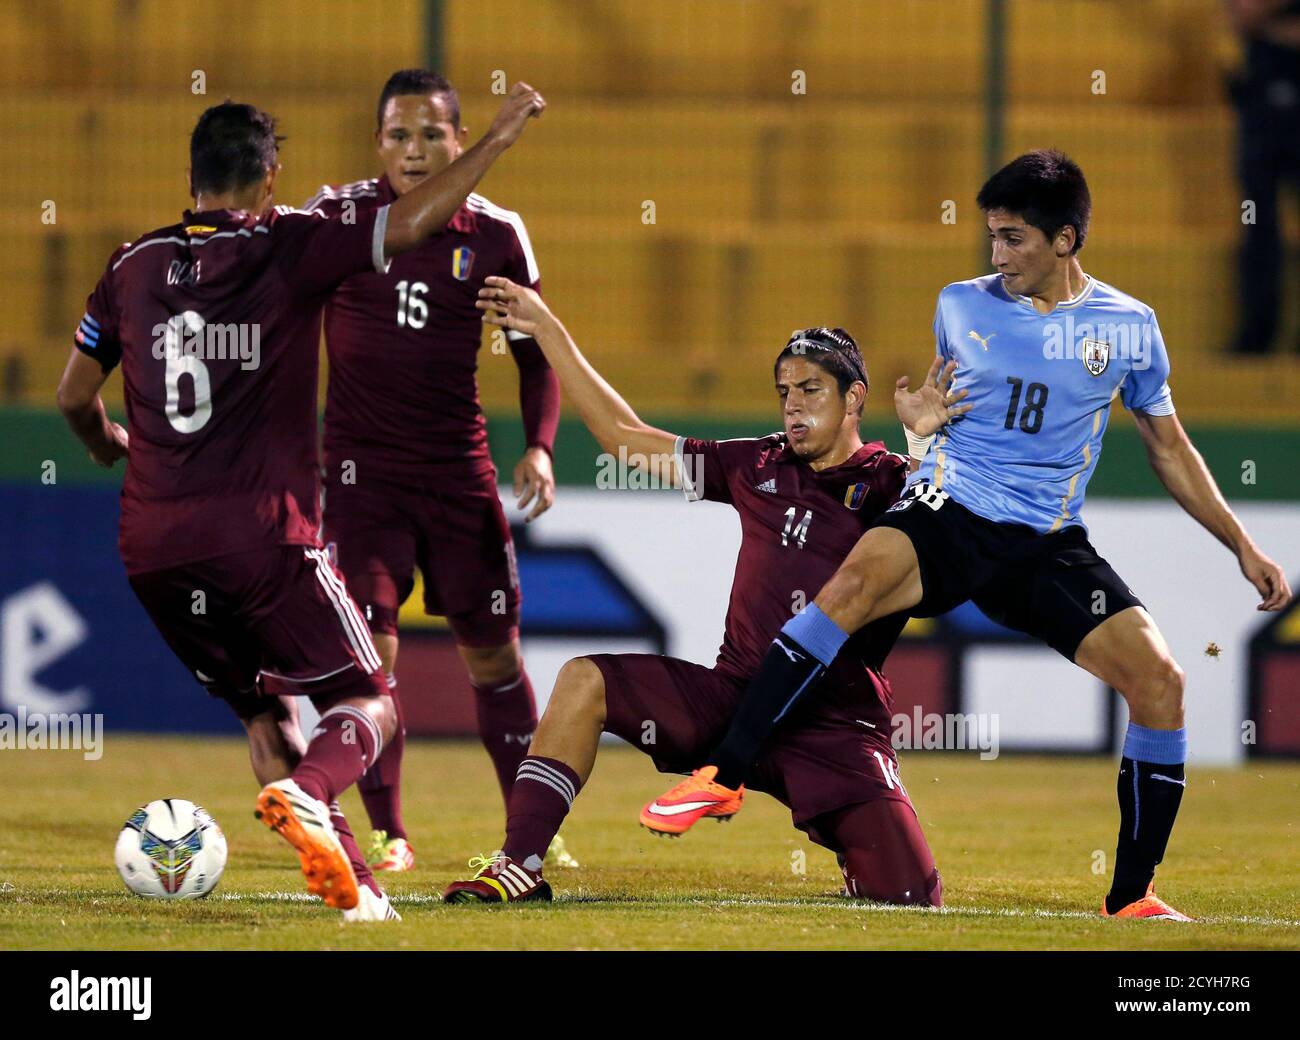 Uruguay's Franco Pizzichillo (R) competes for the ball with Venezuela's  Franko Diaz Graterol, Luis Jimenez Vivas and Ruben Alejandro Ramirez Dos  Ramos (L-2nd R) during their Group B soccer match at the